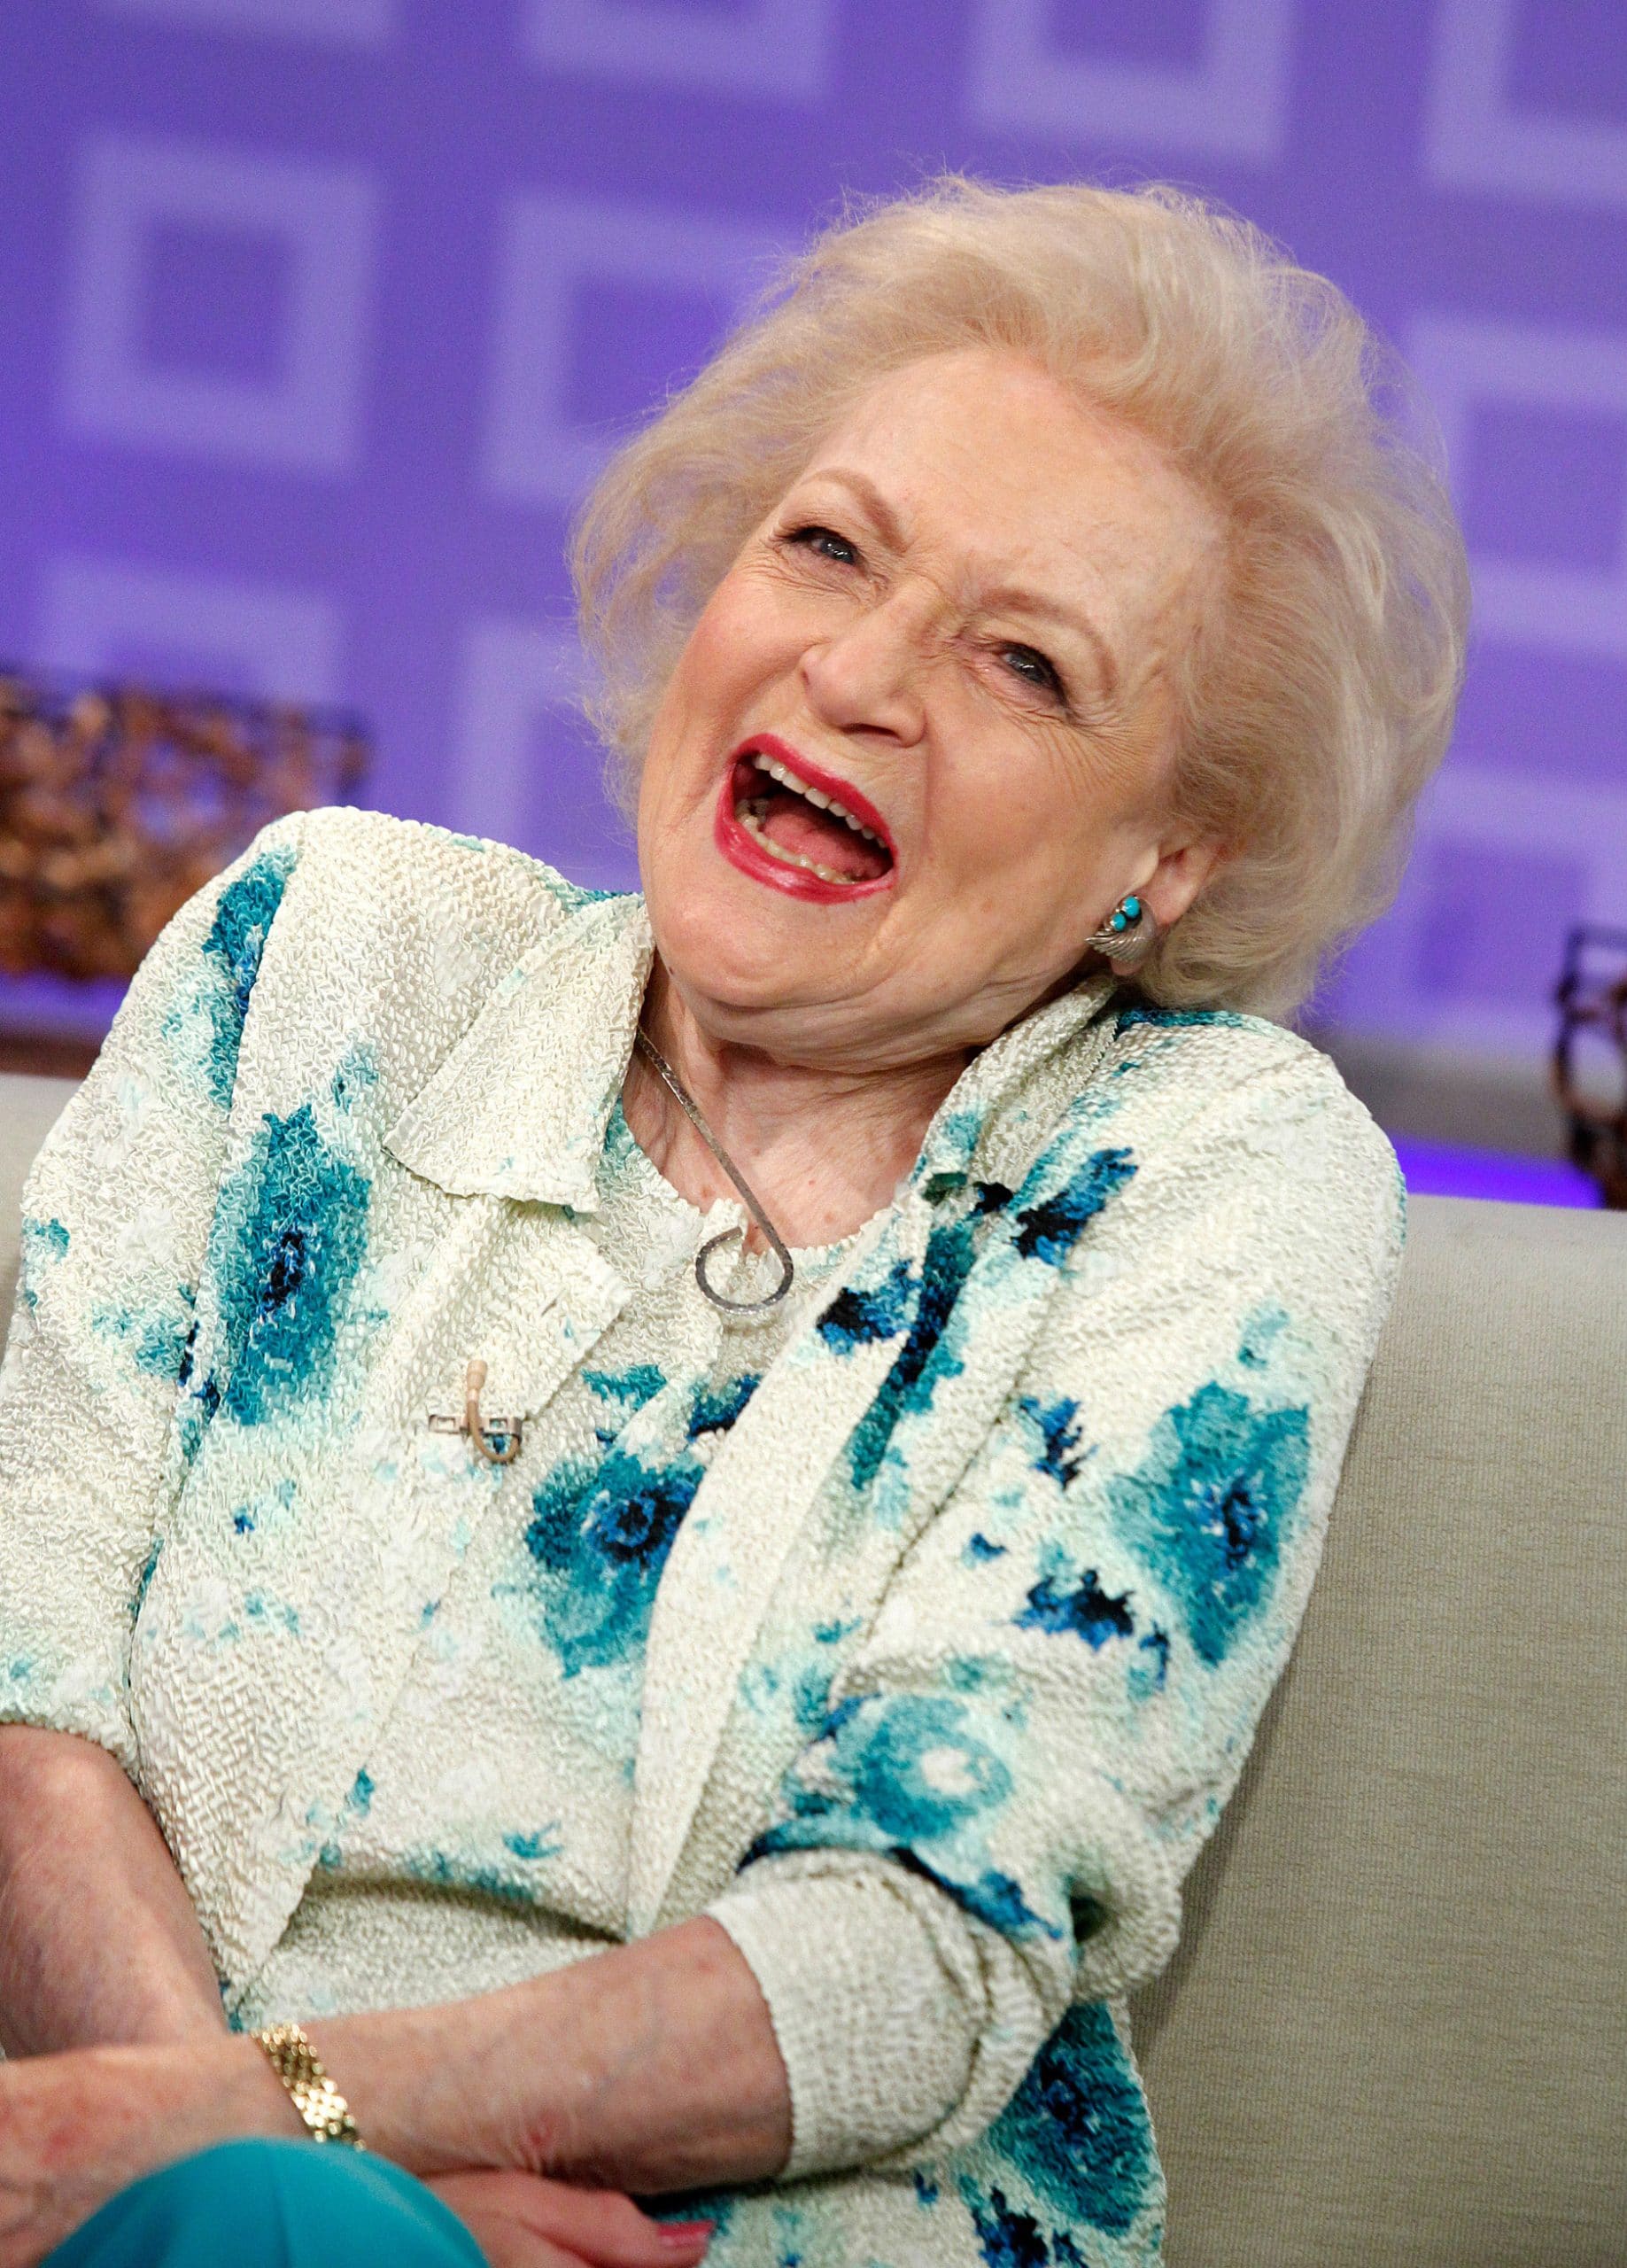 THE TODAY SHOW, Betty White, (aired May 3, 2010)